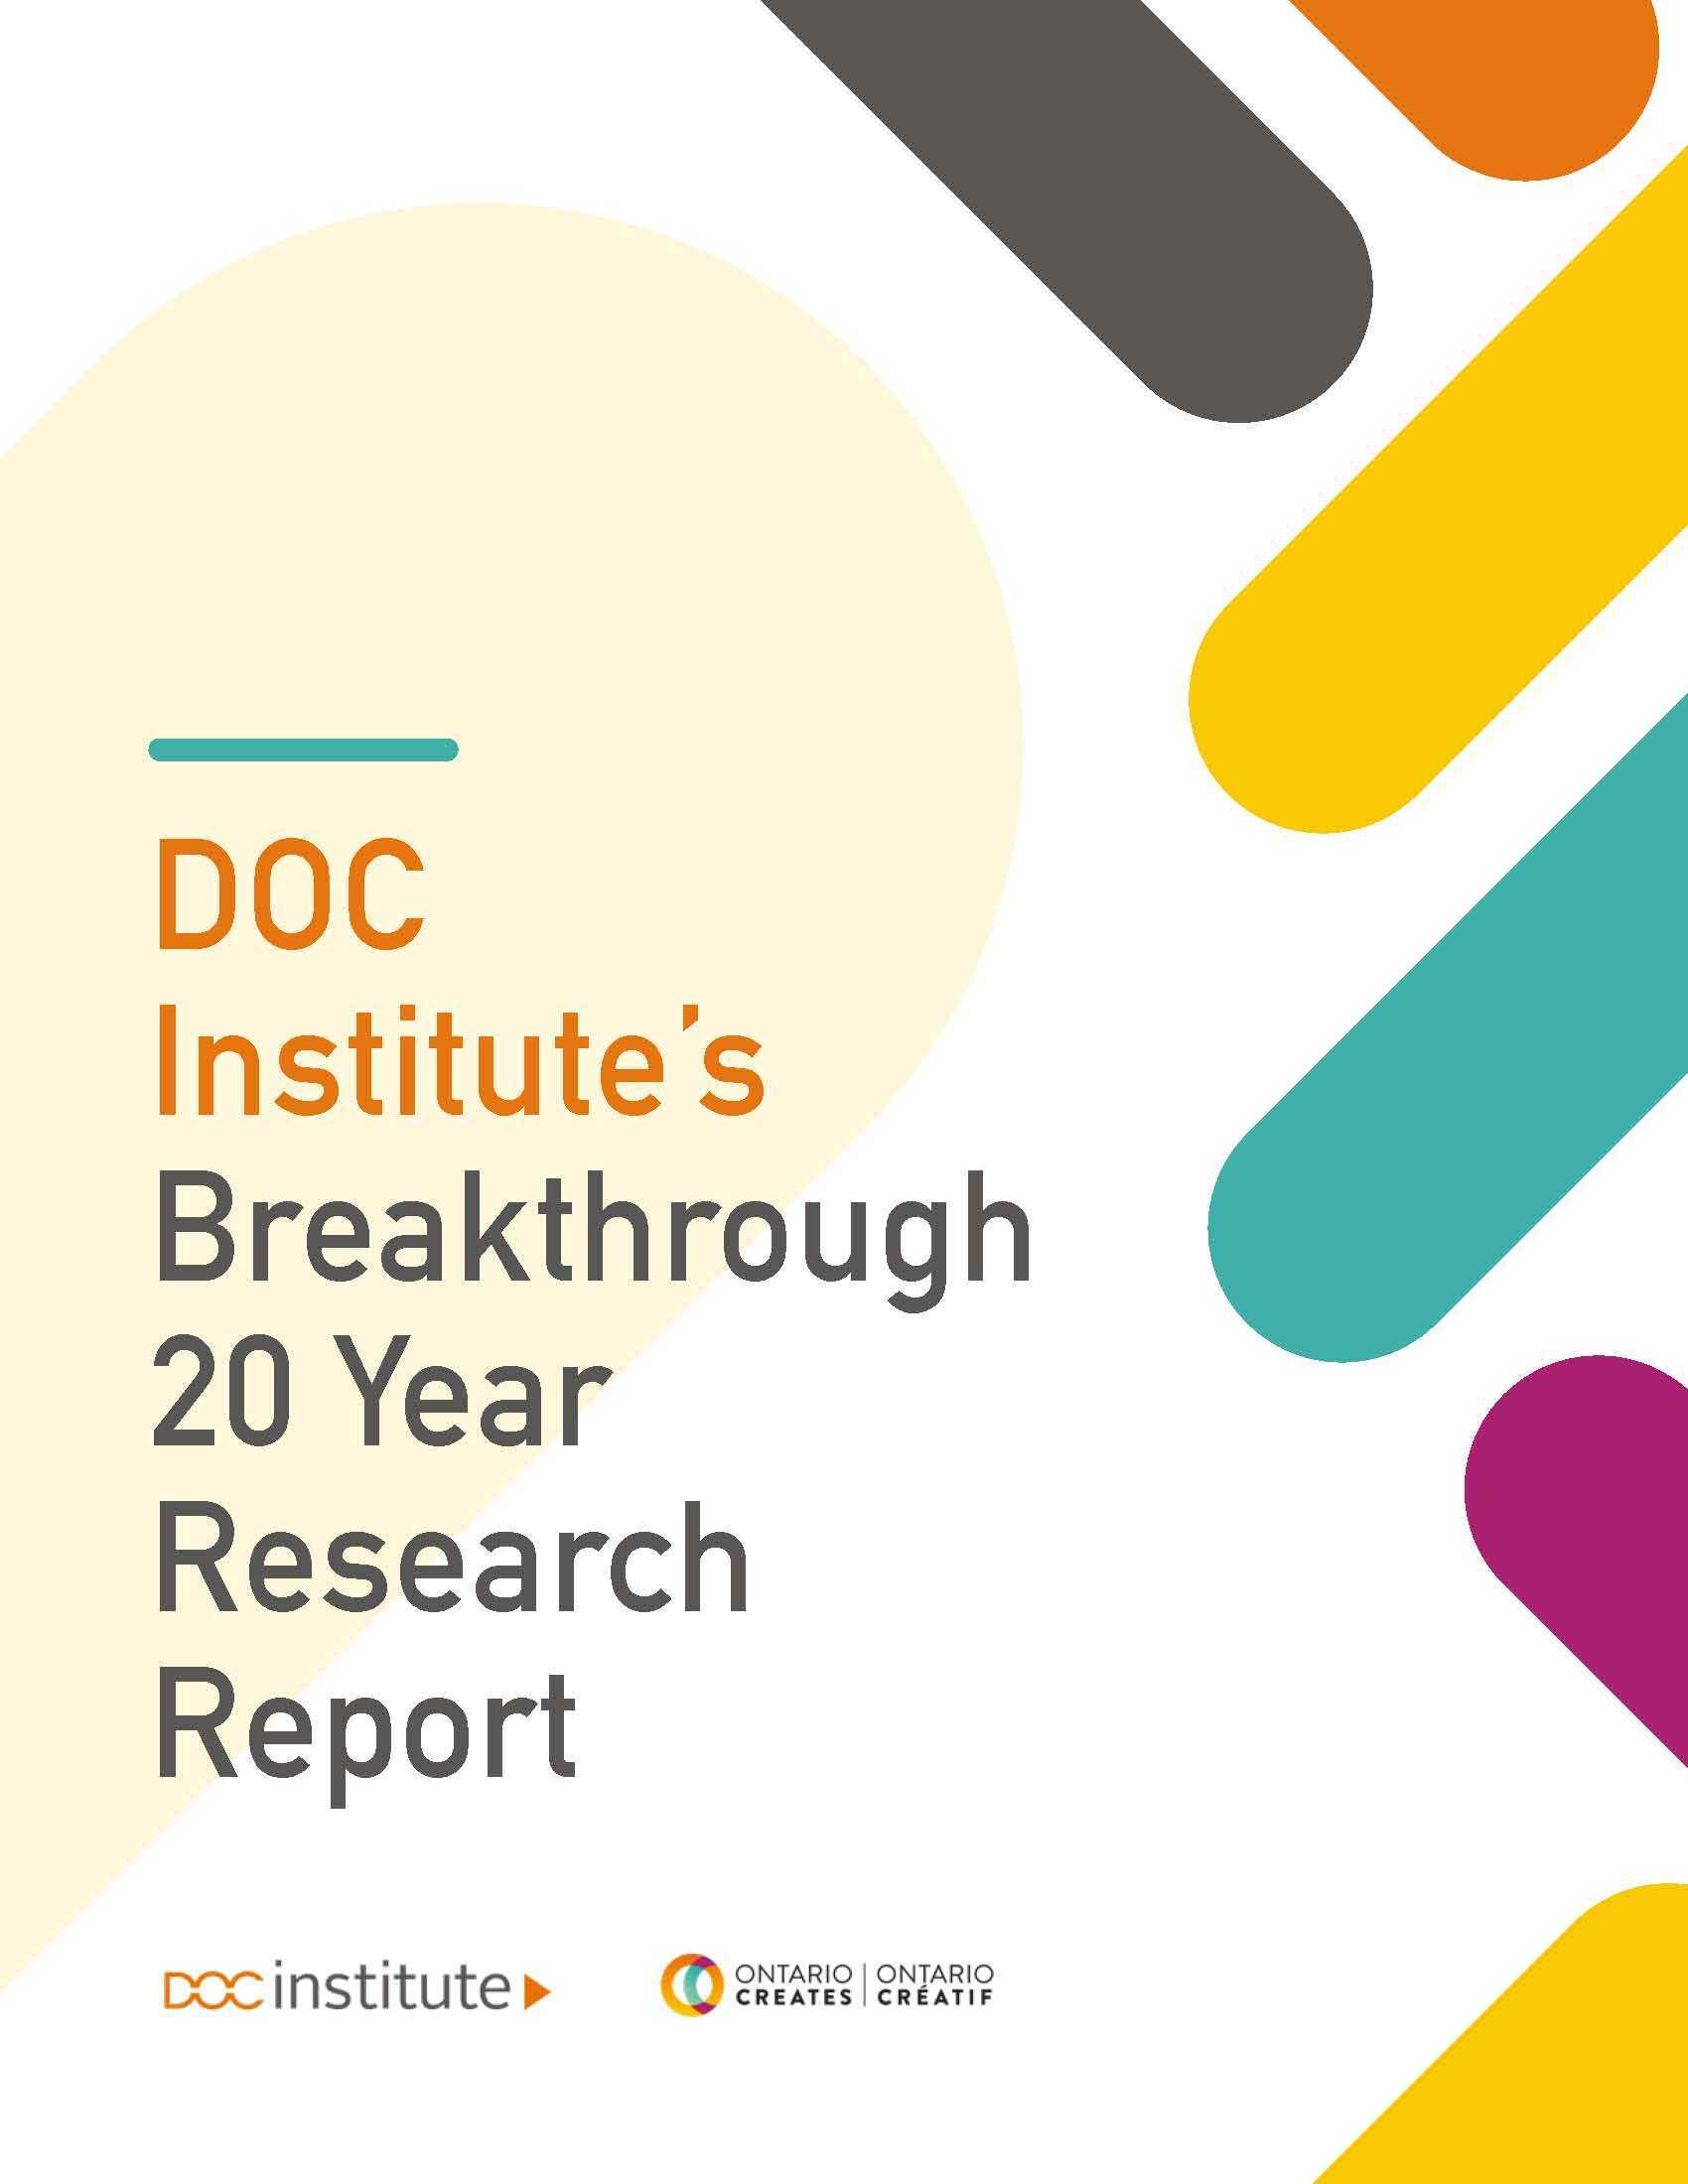 DOC Institute’s Breakthrough 20 Year Research Report